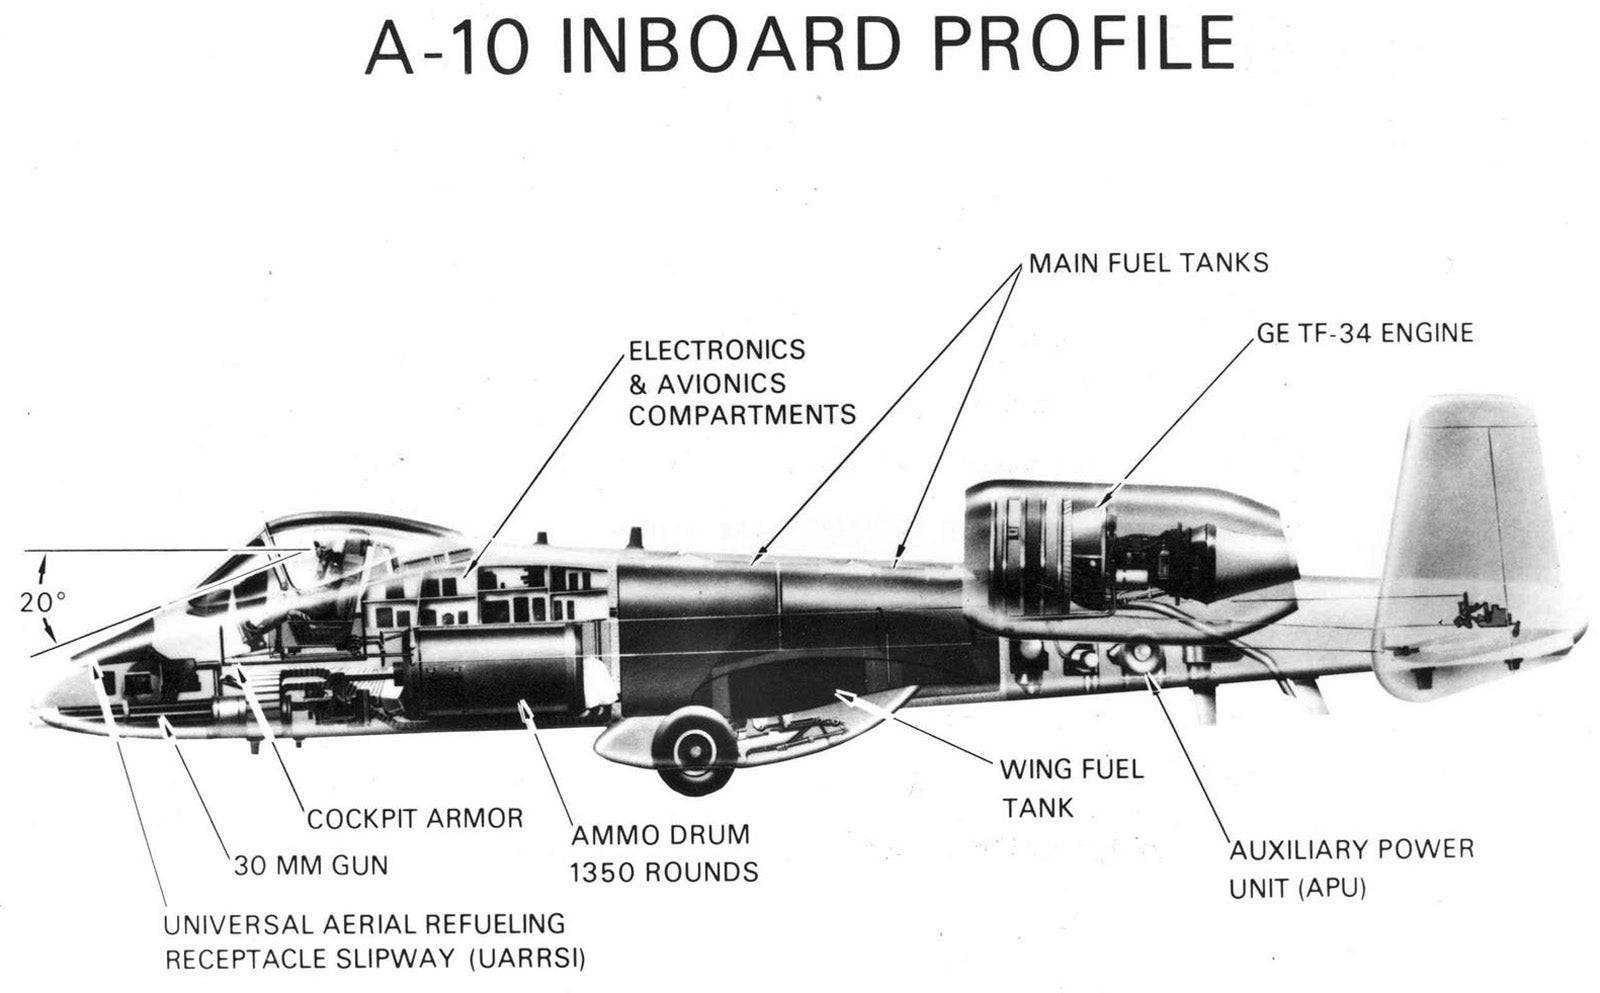 feast your eyes on these rare aircraft cutaway drawings